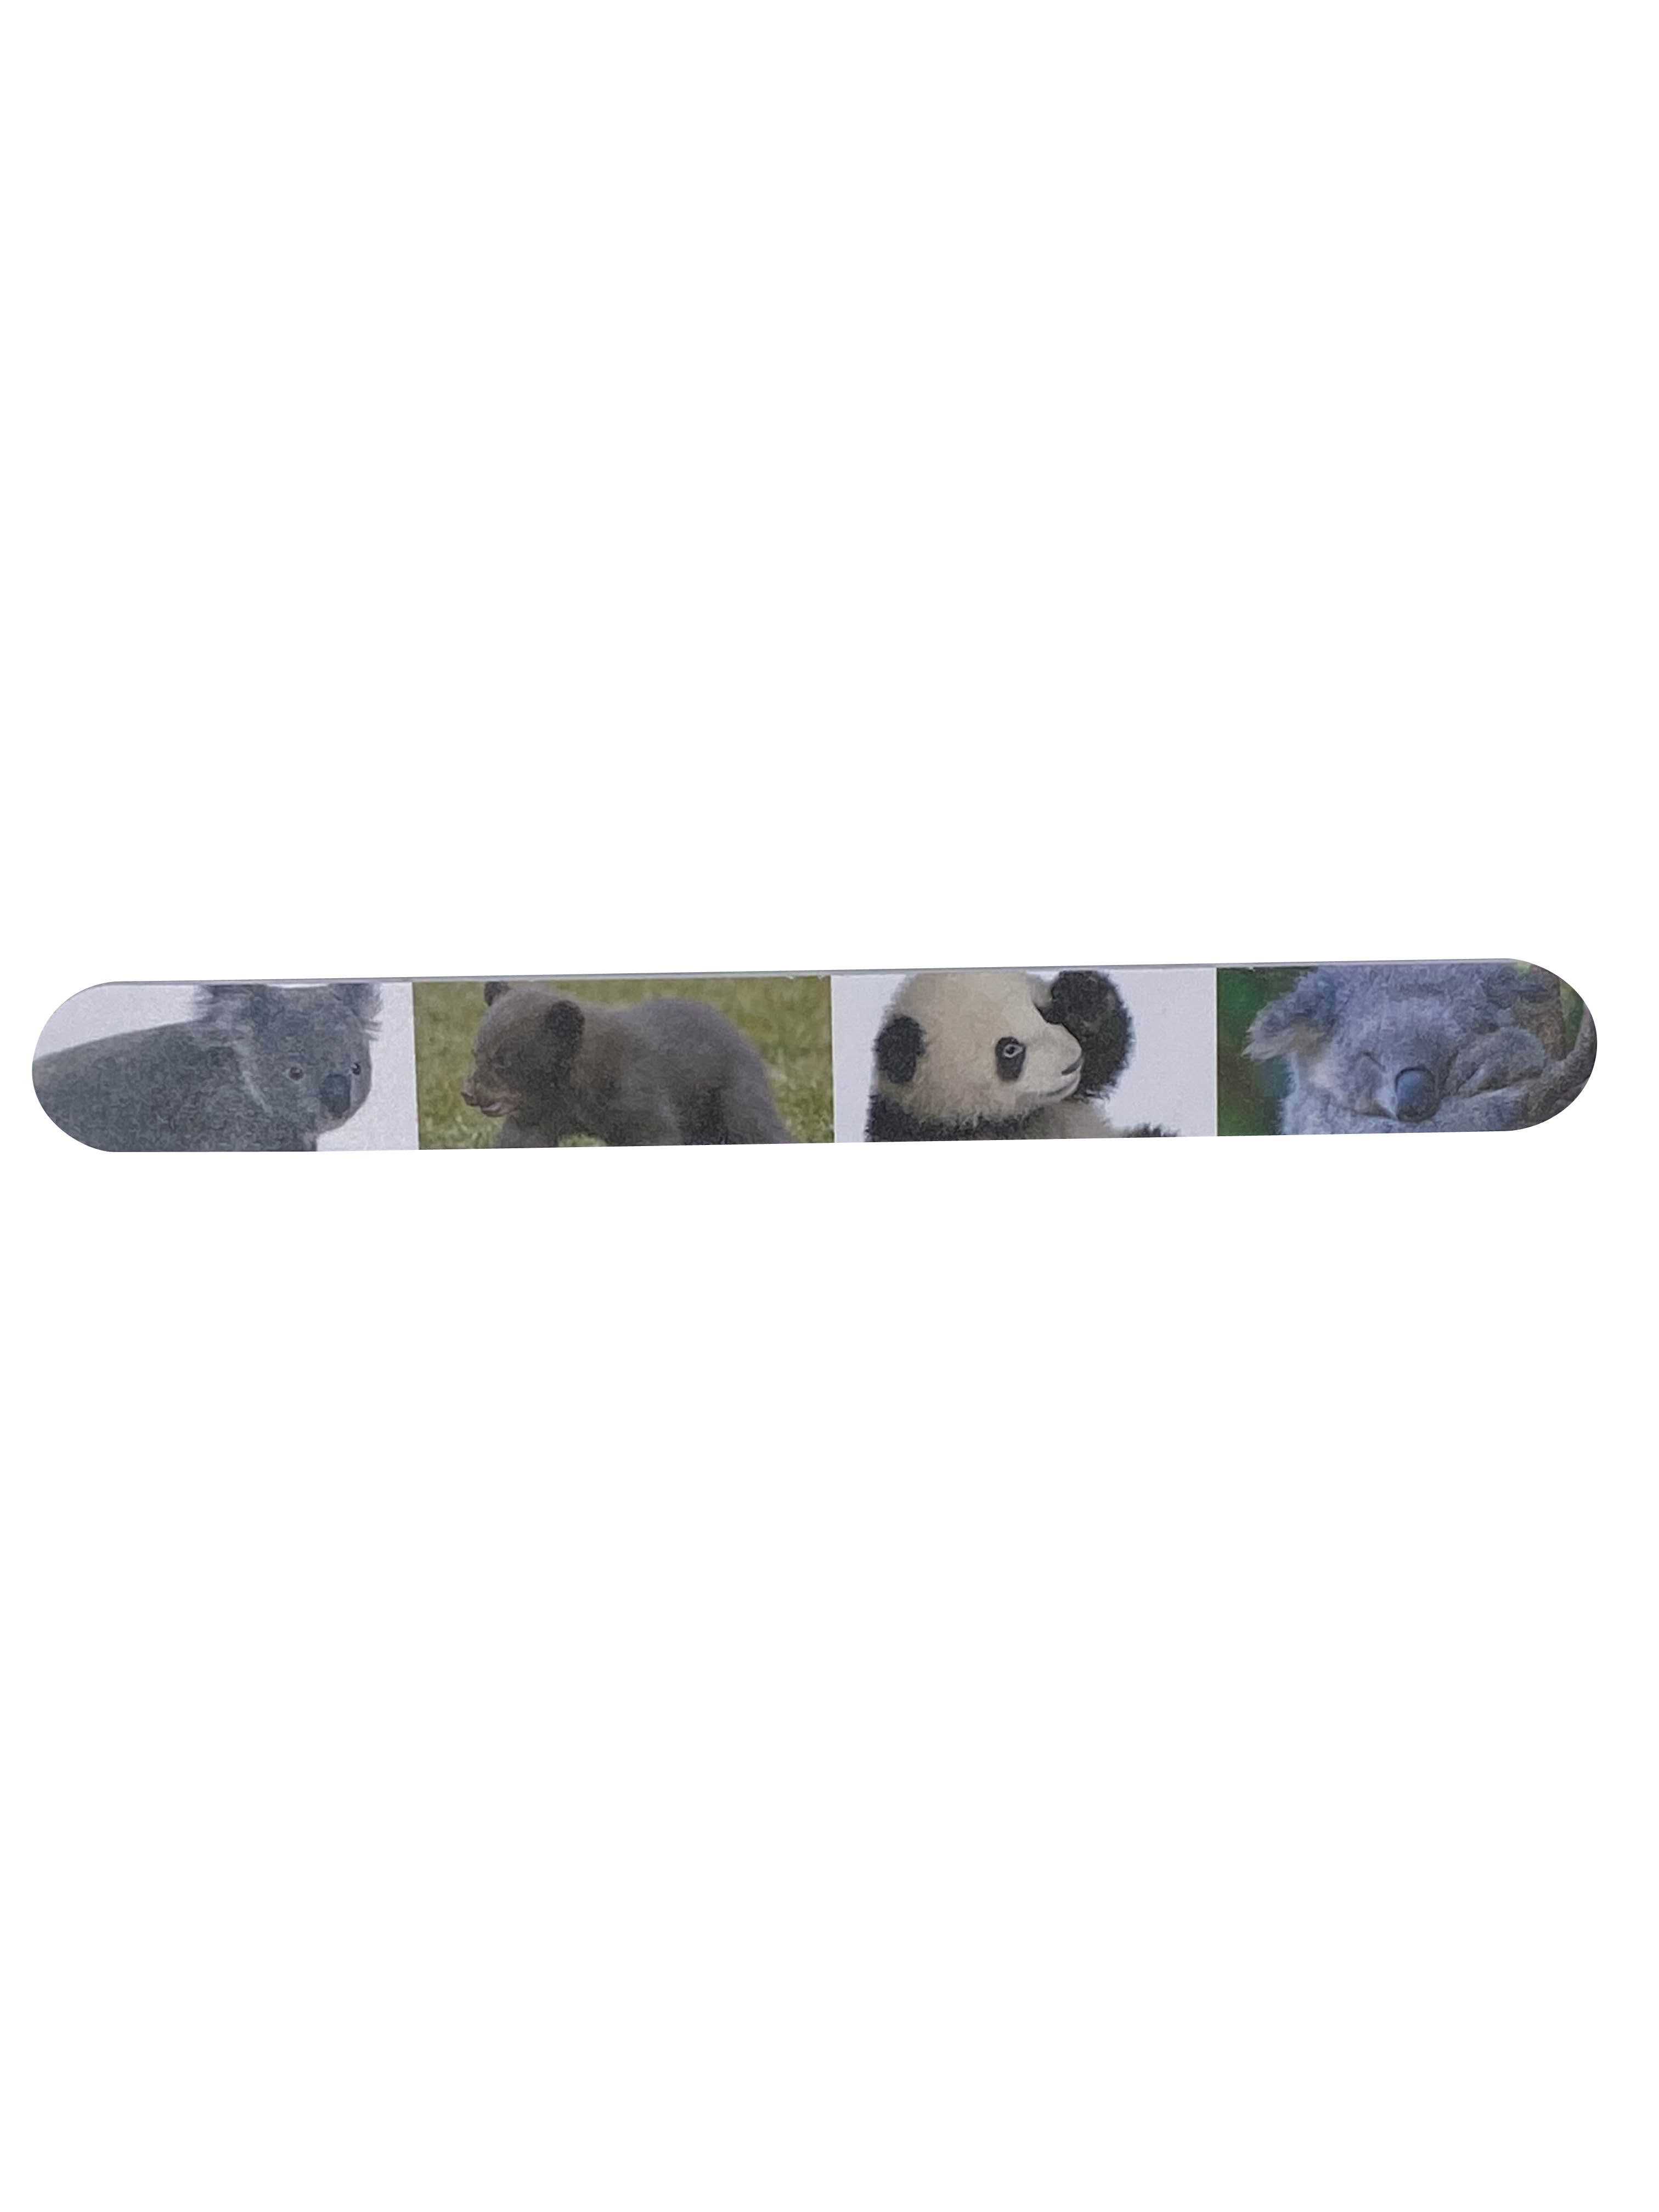 Nail File - For Dogs or Humans - 6 Pack Deals & Packages Warren London Bears 1 File 